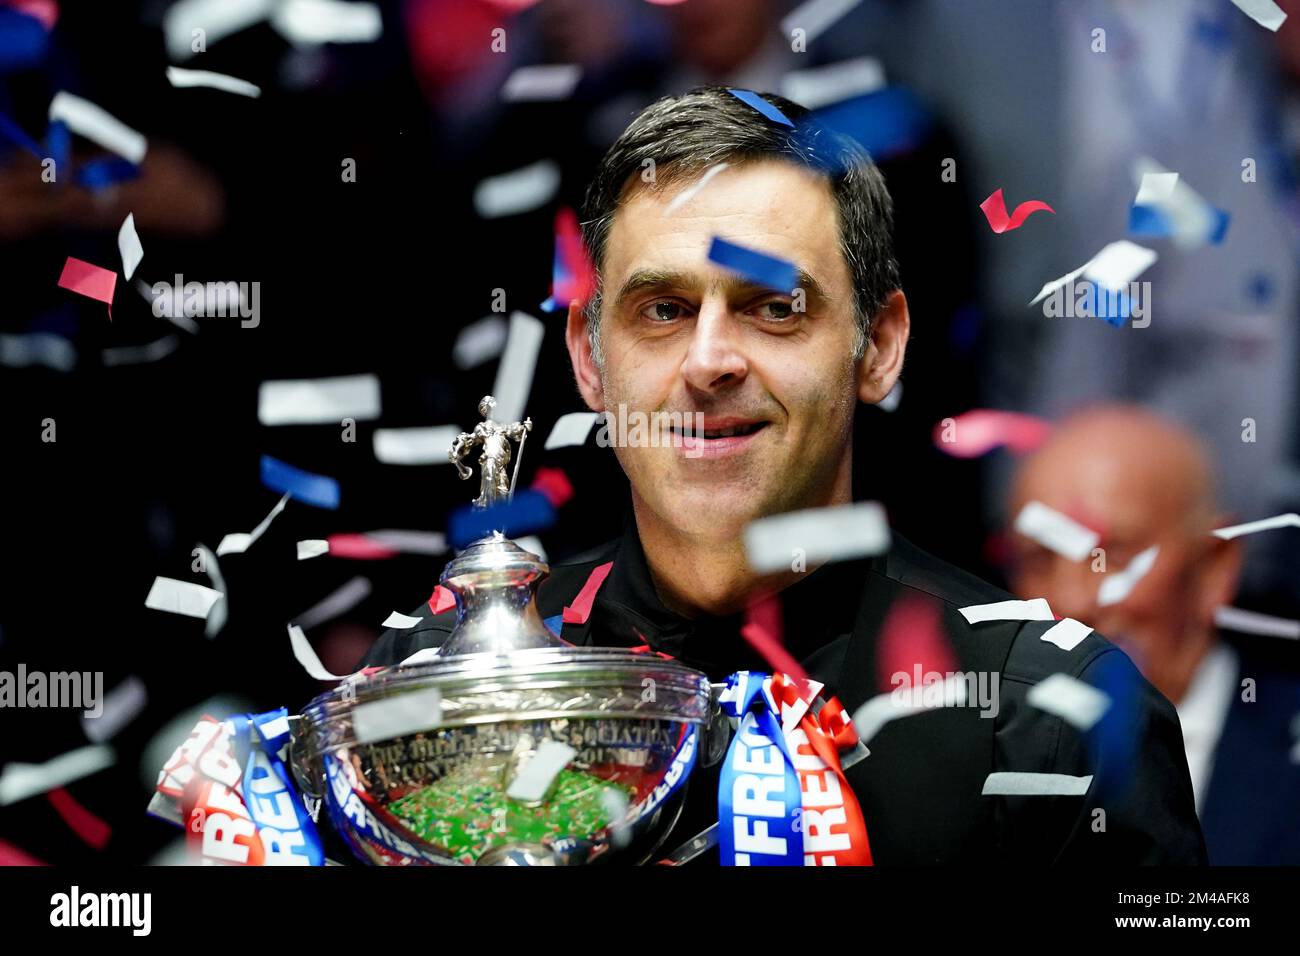 File photo dated 02-05-2022 of England's Ronnie O'Sullivan. England star Beth Mead leads the six nominees for the BBC Sports Personality of the Year award. The Arsenal forward won the Golden Boot for leading scorer and was named player of the tournament during England’s Euro 2022 victory in the summer. Mead is joined on the shortlist by England cricket captain Ben Stokes, snooker star Ronnie O’Sullivan, gymnast Jessica Gadirova, curler Eve Muirhead and runner Jake Wightman. Issue date: Monday December 20, 2022. Stock Photo